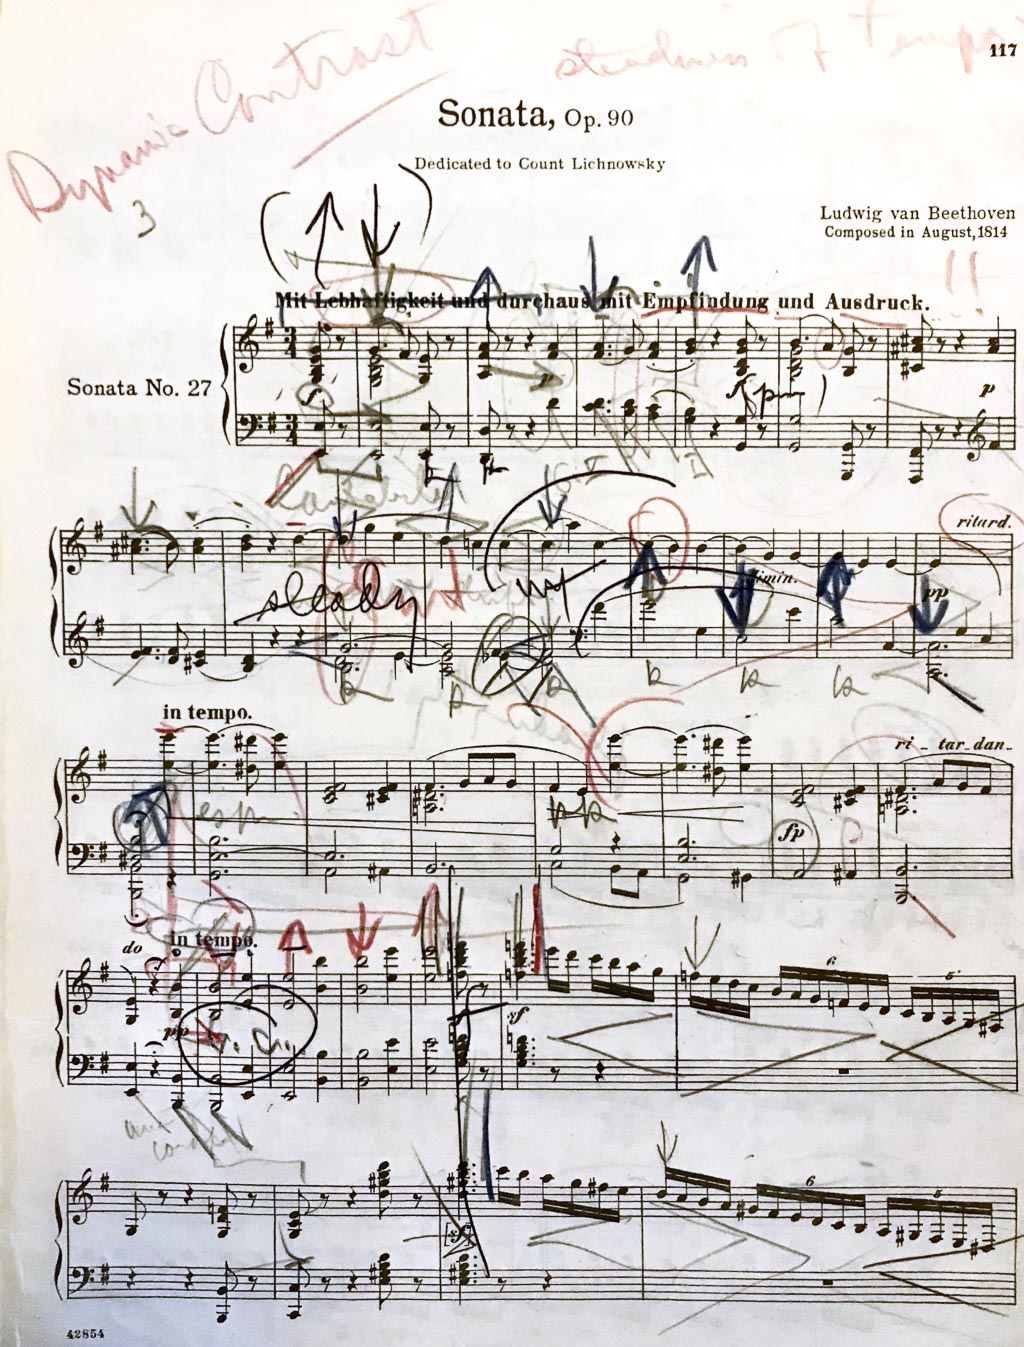 A page of music manuscript (Beethoven Sonata Opus 90) with instructional markings in various colors, by Harold Zabrack.